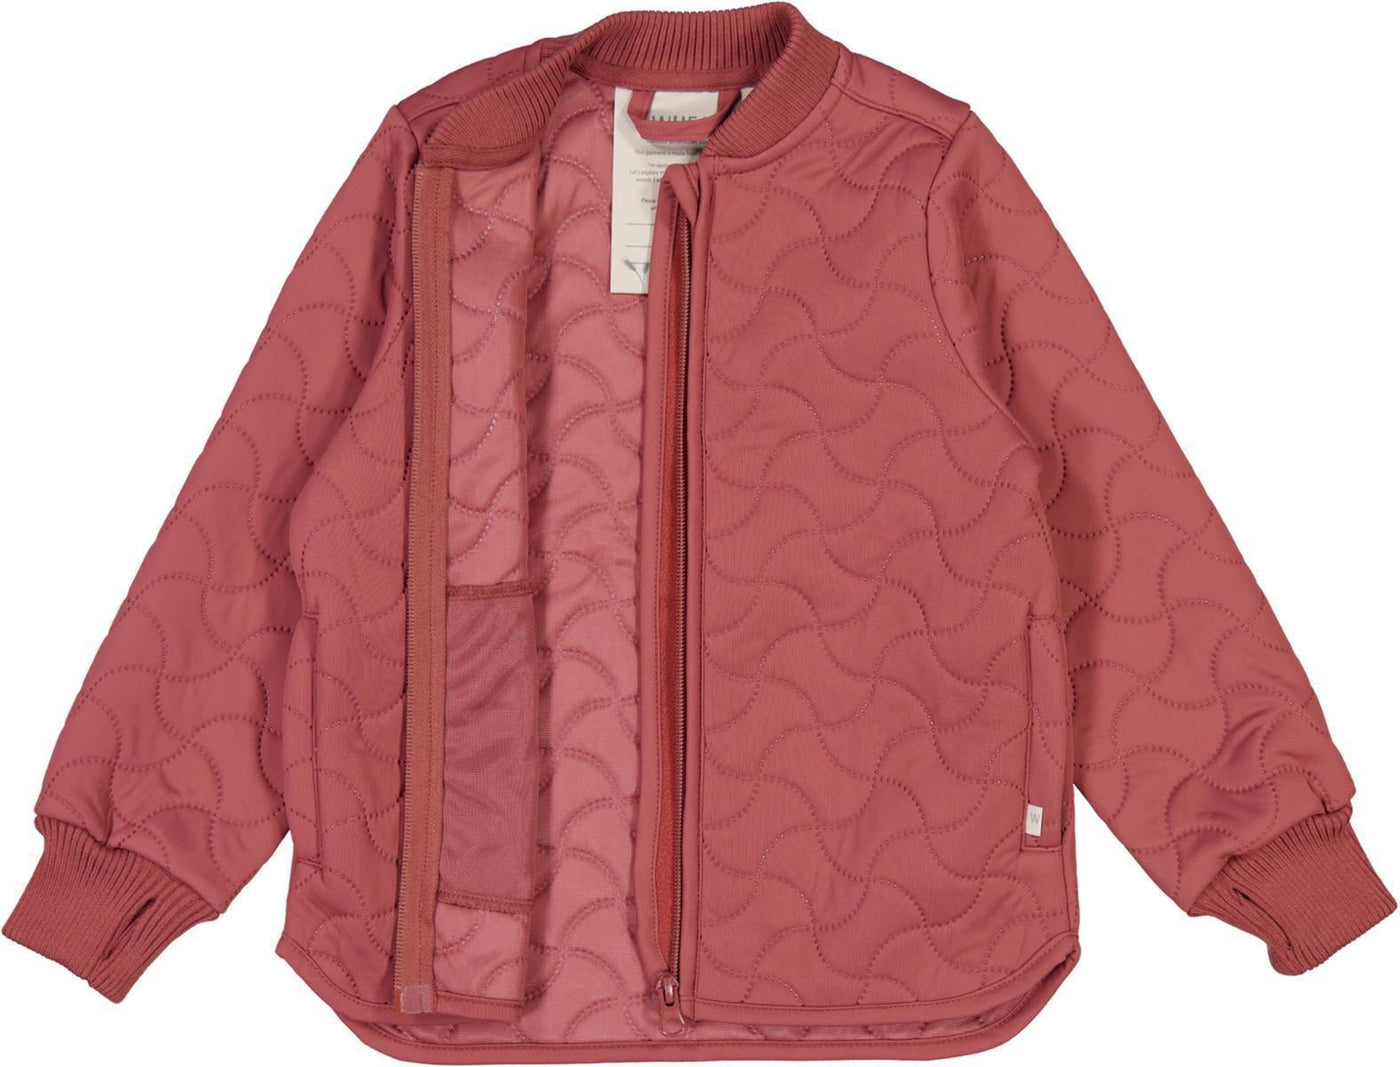 WHEAT - Thermo Jacket Loui - 2074 apple butter - 98/3y